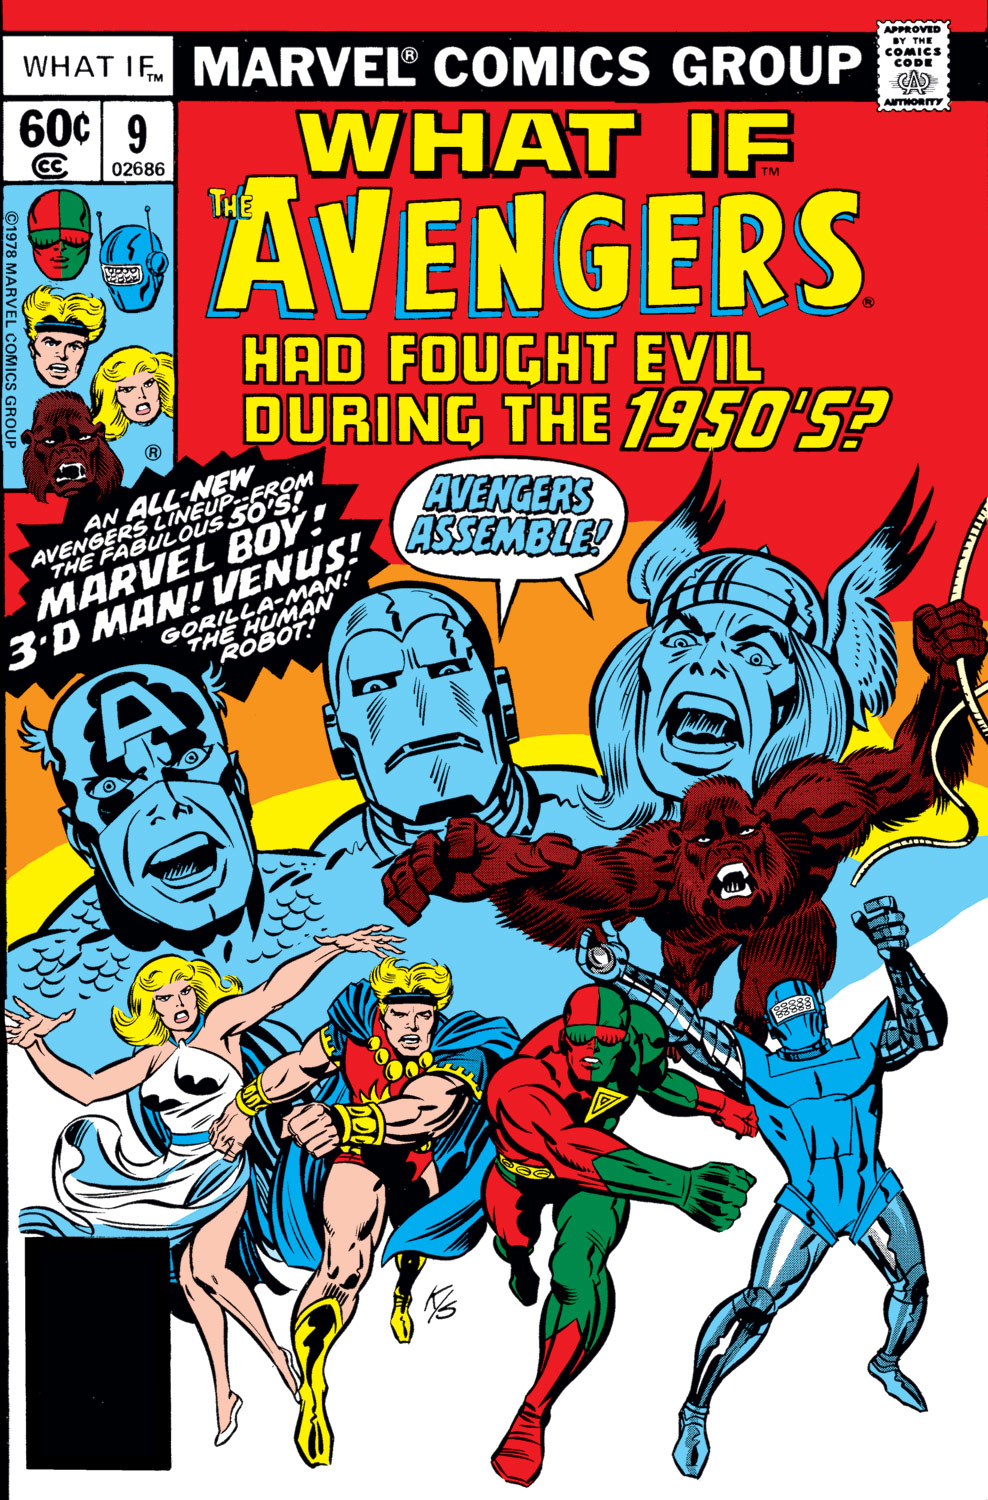 Read online What If? (1977) comic -  Issue #9 - The Avengers had fought during the 1950's - 1